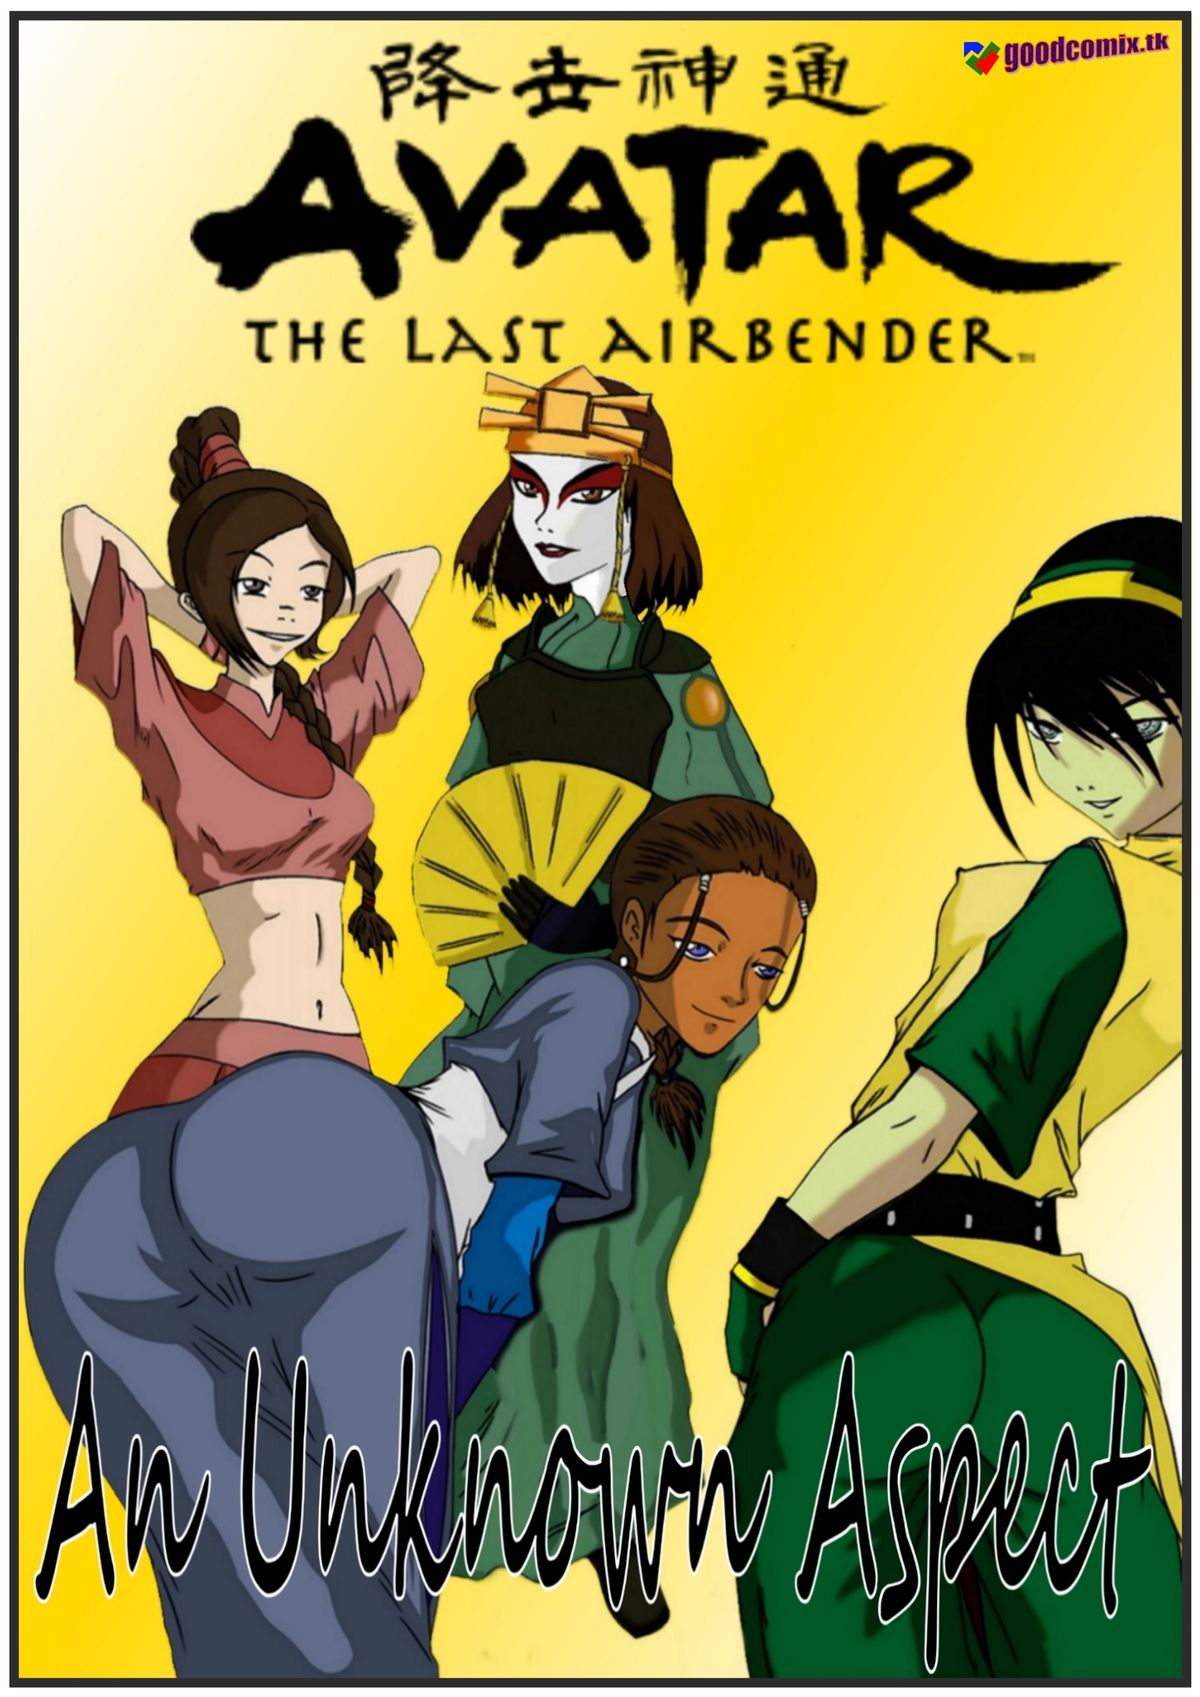 Bleedor An Unknown Aspect Avatar The Last Airbender English 847802 0001